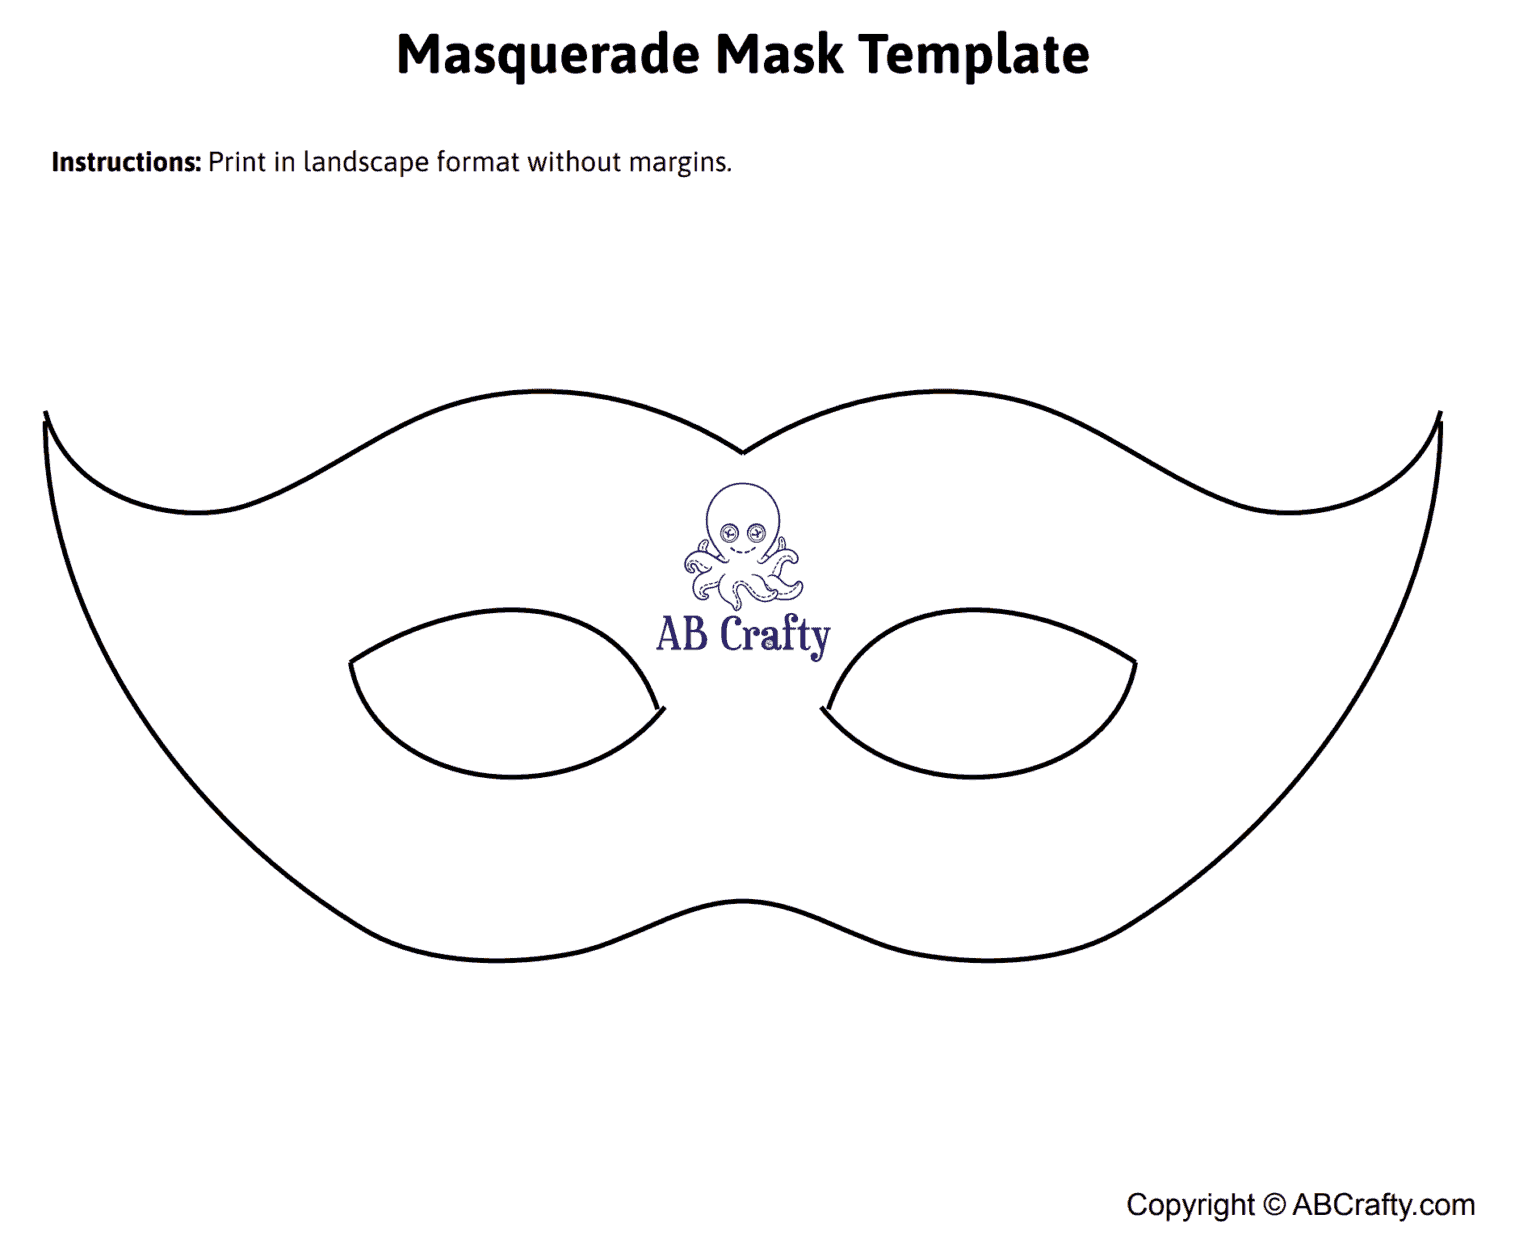 masquerade-mask-template-free-printable-download-ab-crafty